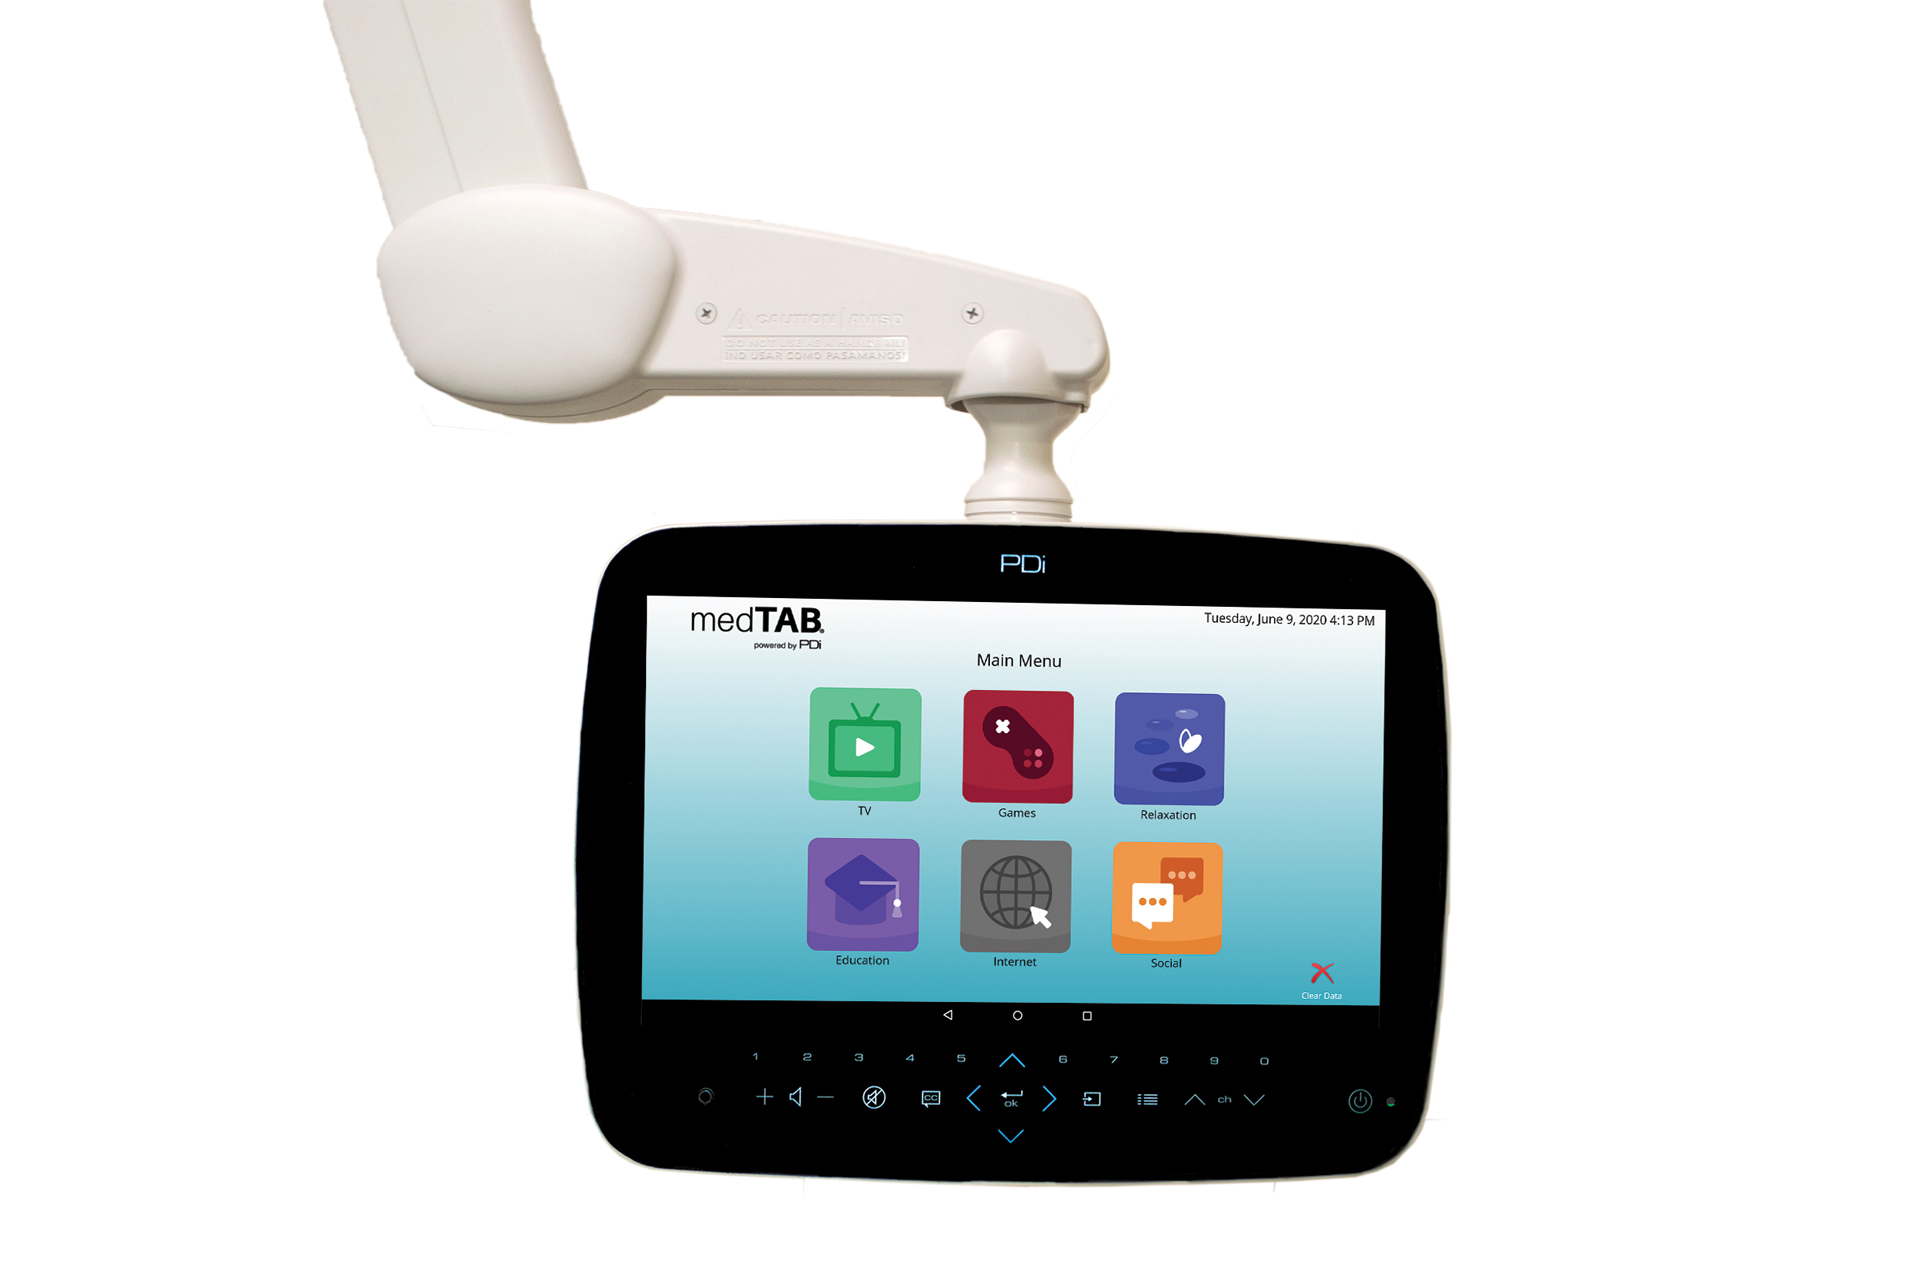 Product image of the medTAB14 healthcare television built by PDi Communication Systems, Inc. with six icons and internet